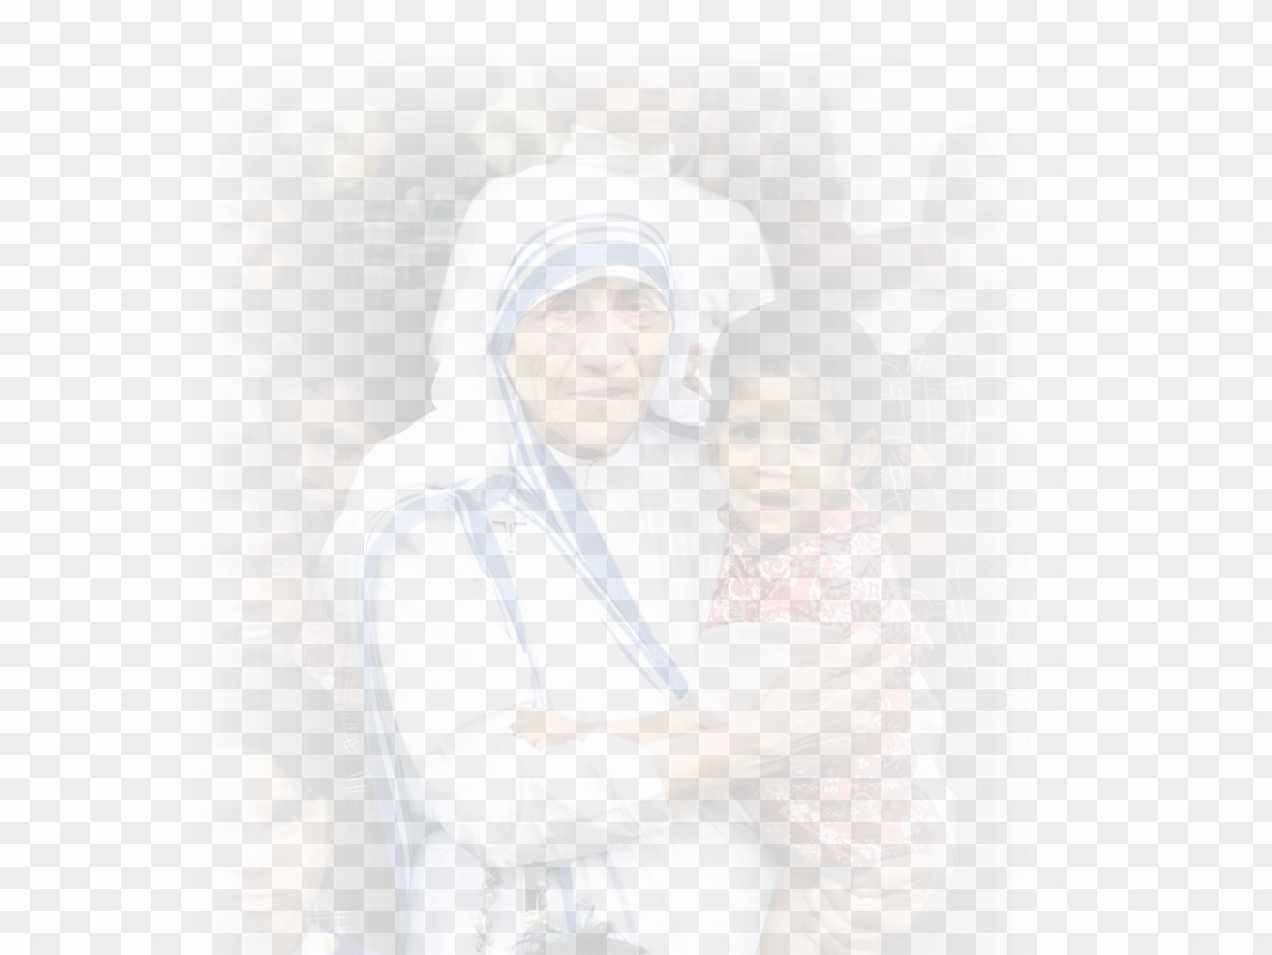 Mother Teresa background editing png 